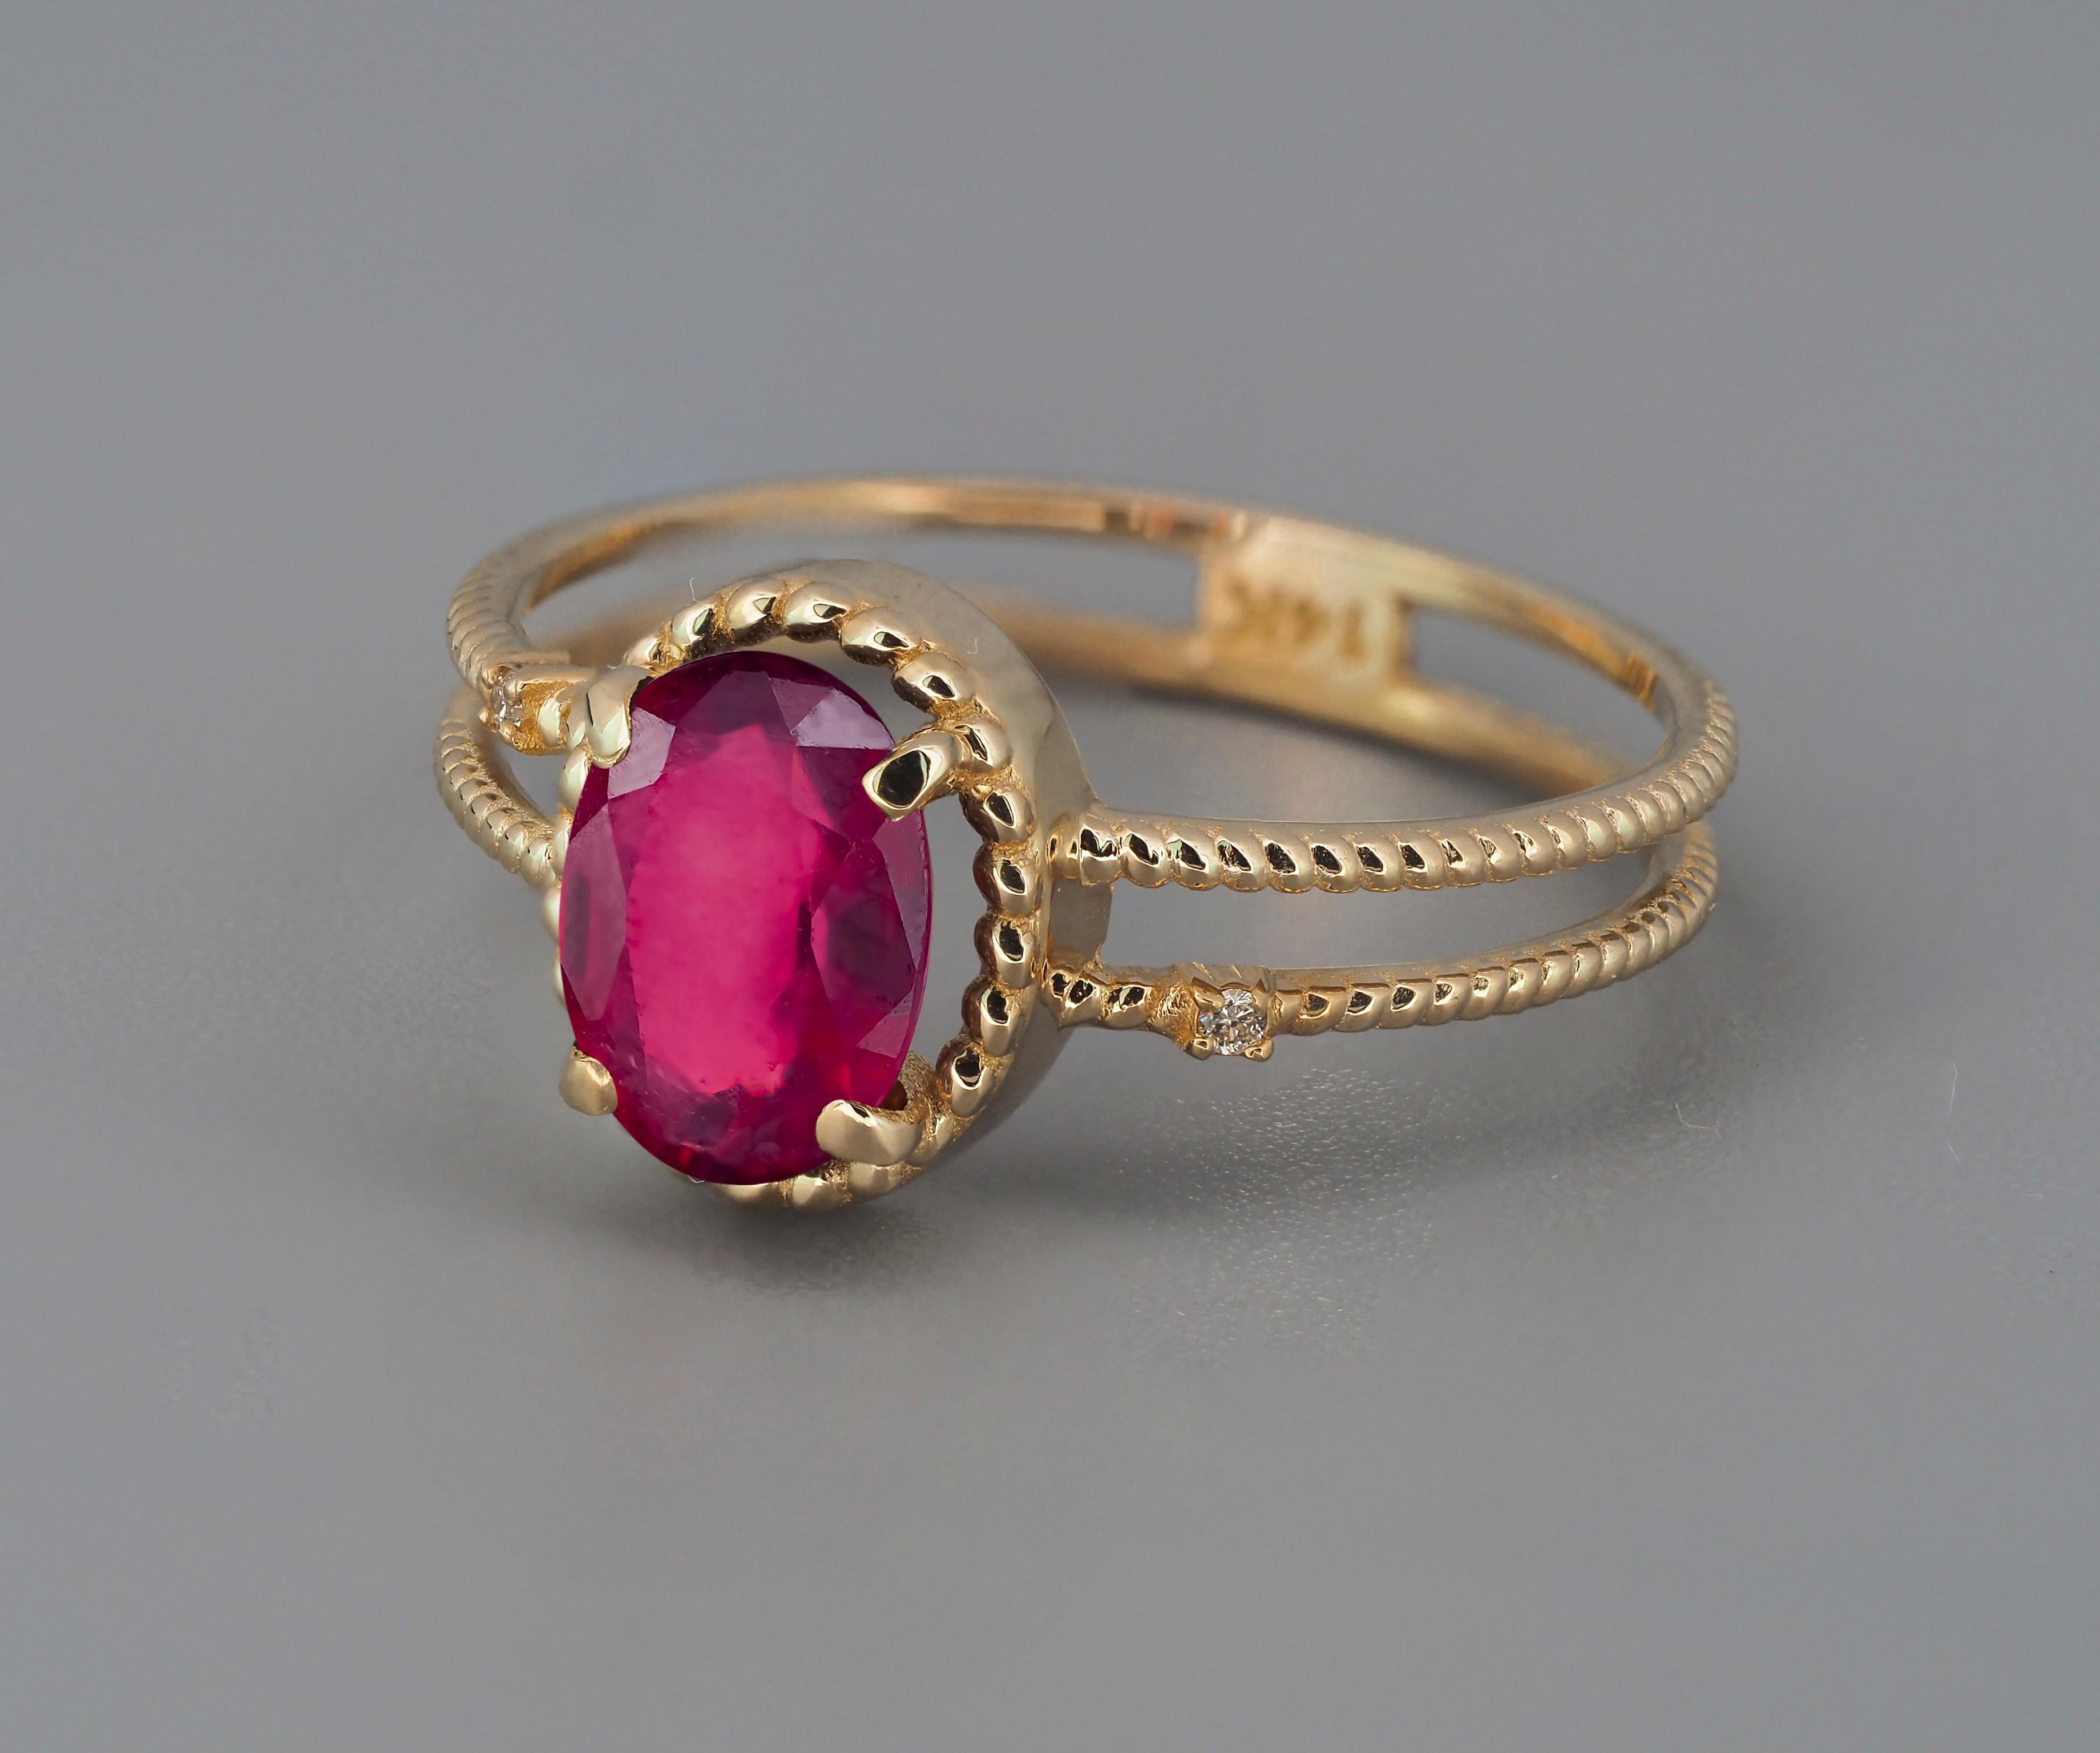 Oval Cut Oval Ruby Ring, 14k Gold Ring with Ruby, Minimalist Ruby Ring For Sale